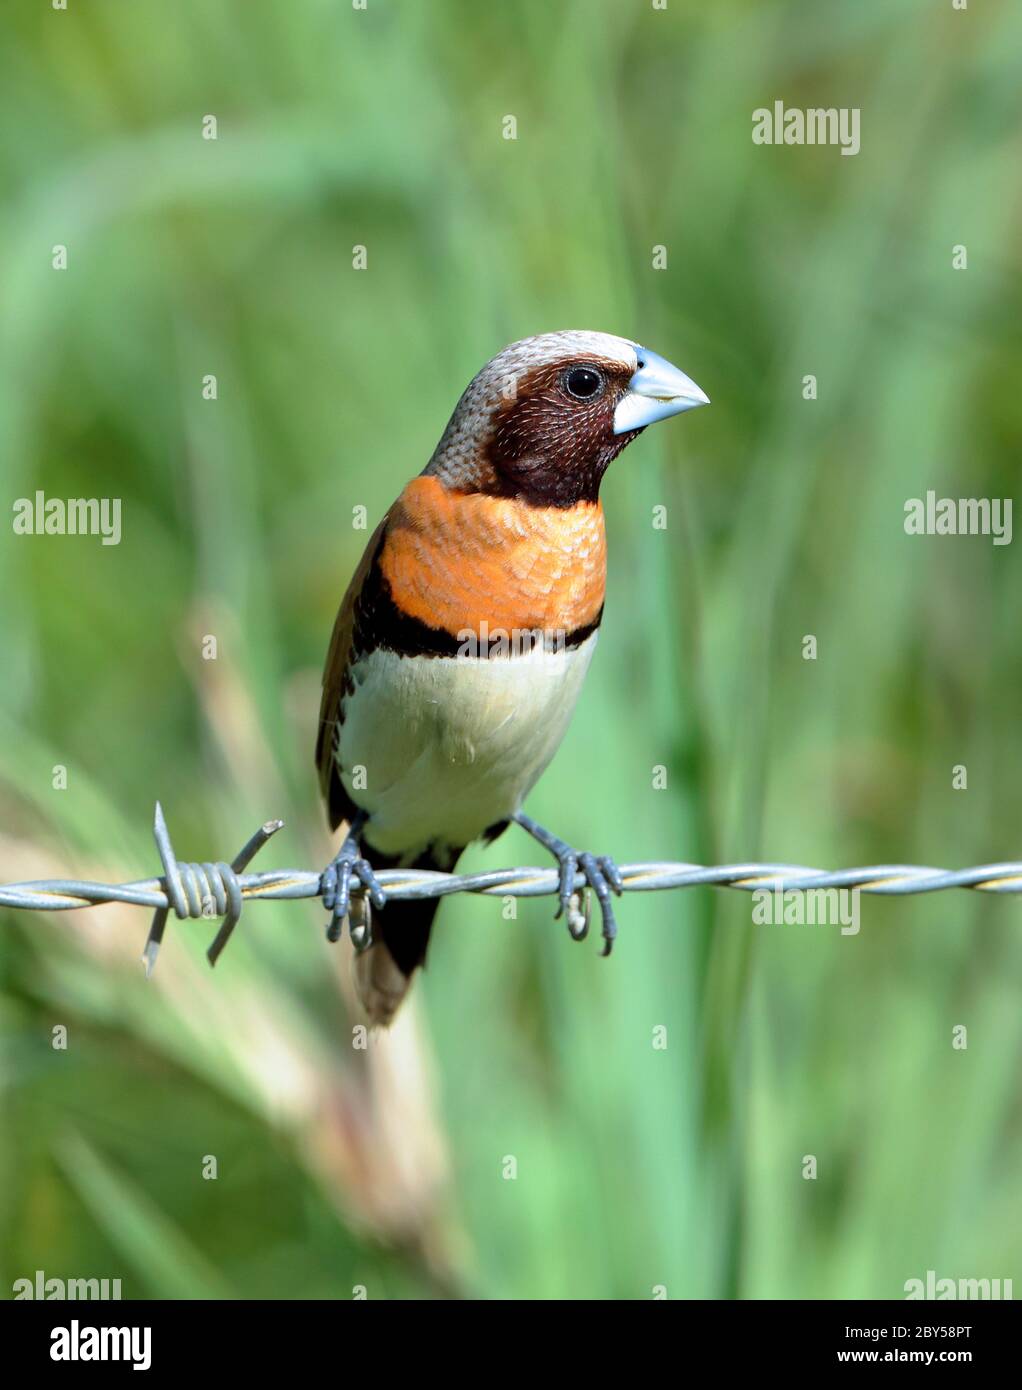 Chestnut-breasted mannikin, Chestnut-breasted Munia, Bully Bird (Lonchura castaneothorax), Perched on barbed wire. Also known as the Chestnut-breasted Munia or Bully Bird., Australia, Queensland Stock Photo